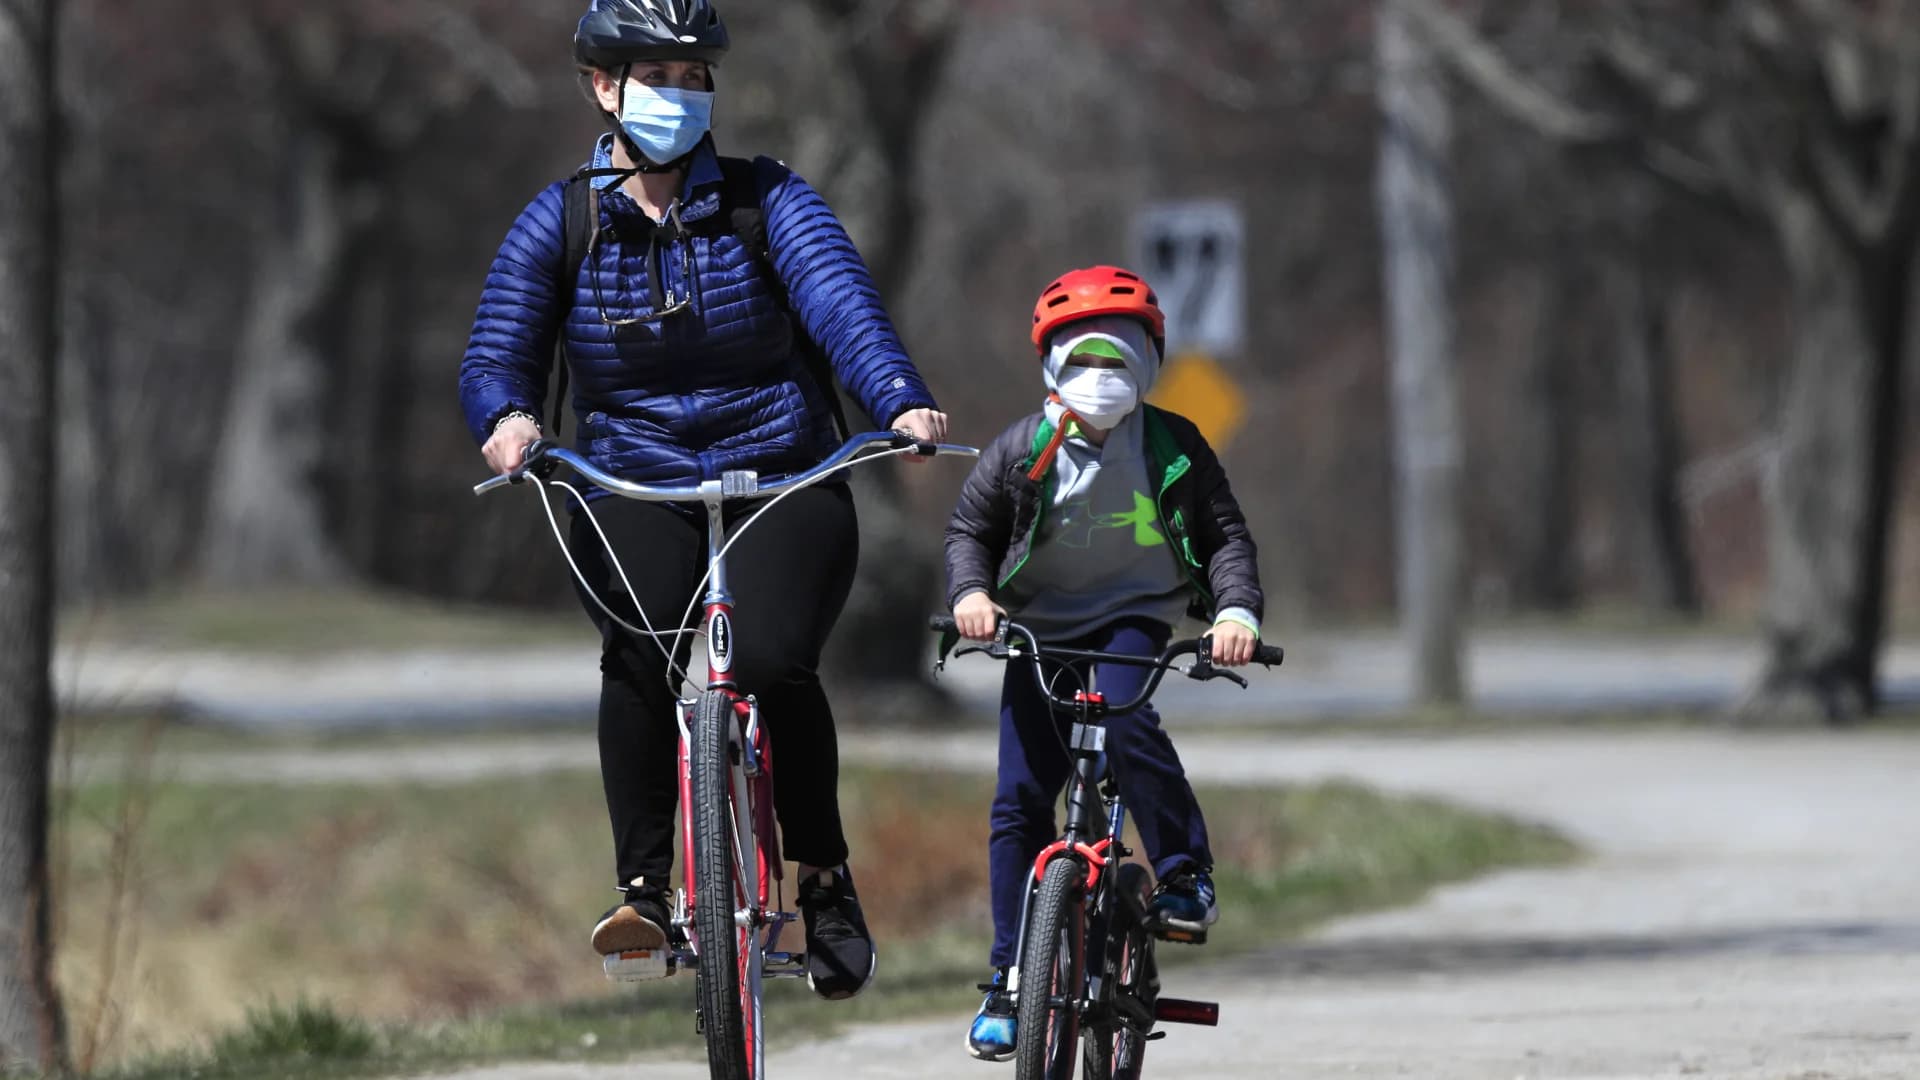 Guide: Are you or your kids taking your bike for a spin more often? Here are 5 safety tips for bicyclists.